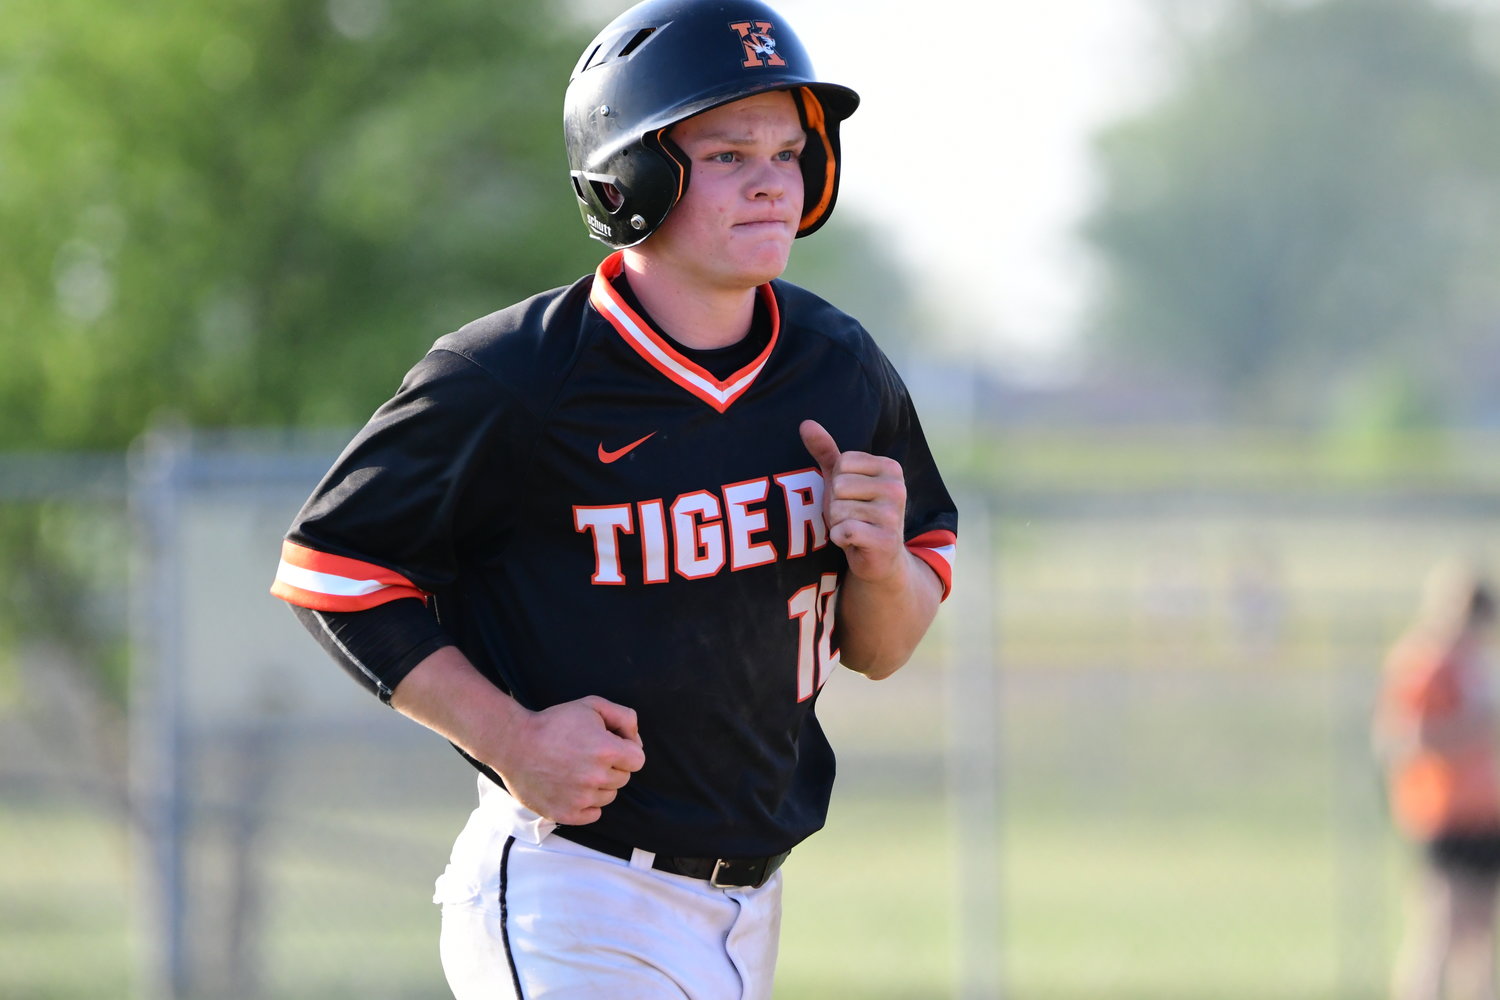 Photos from a baseball game between Kirksville and Putnam County on May 11, 2022.